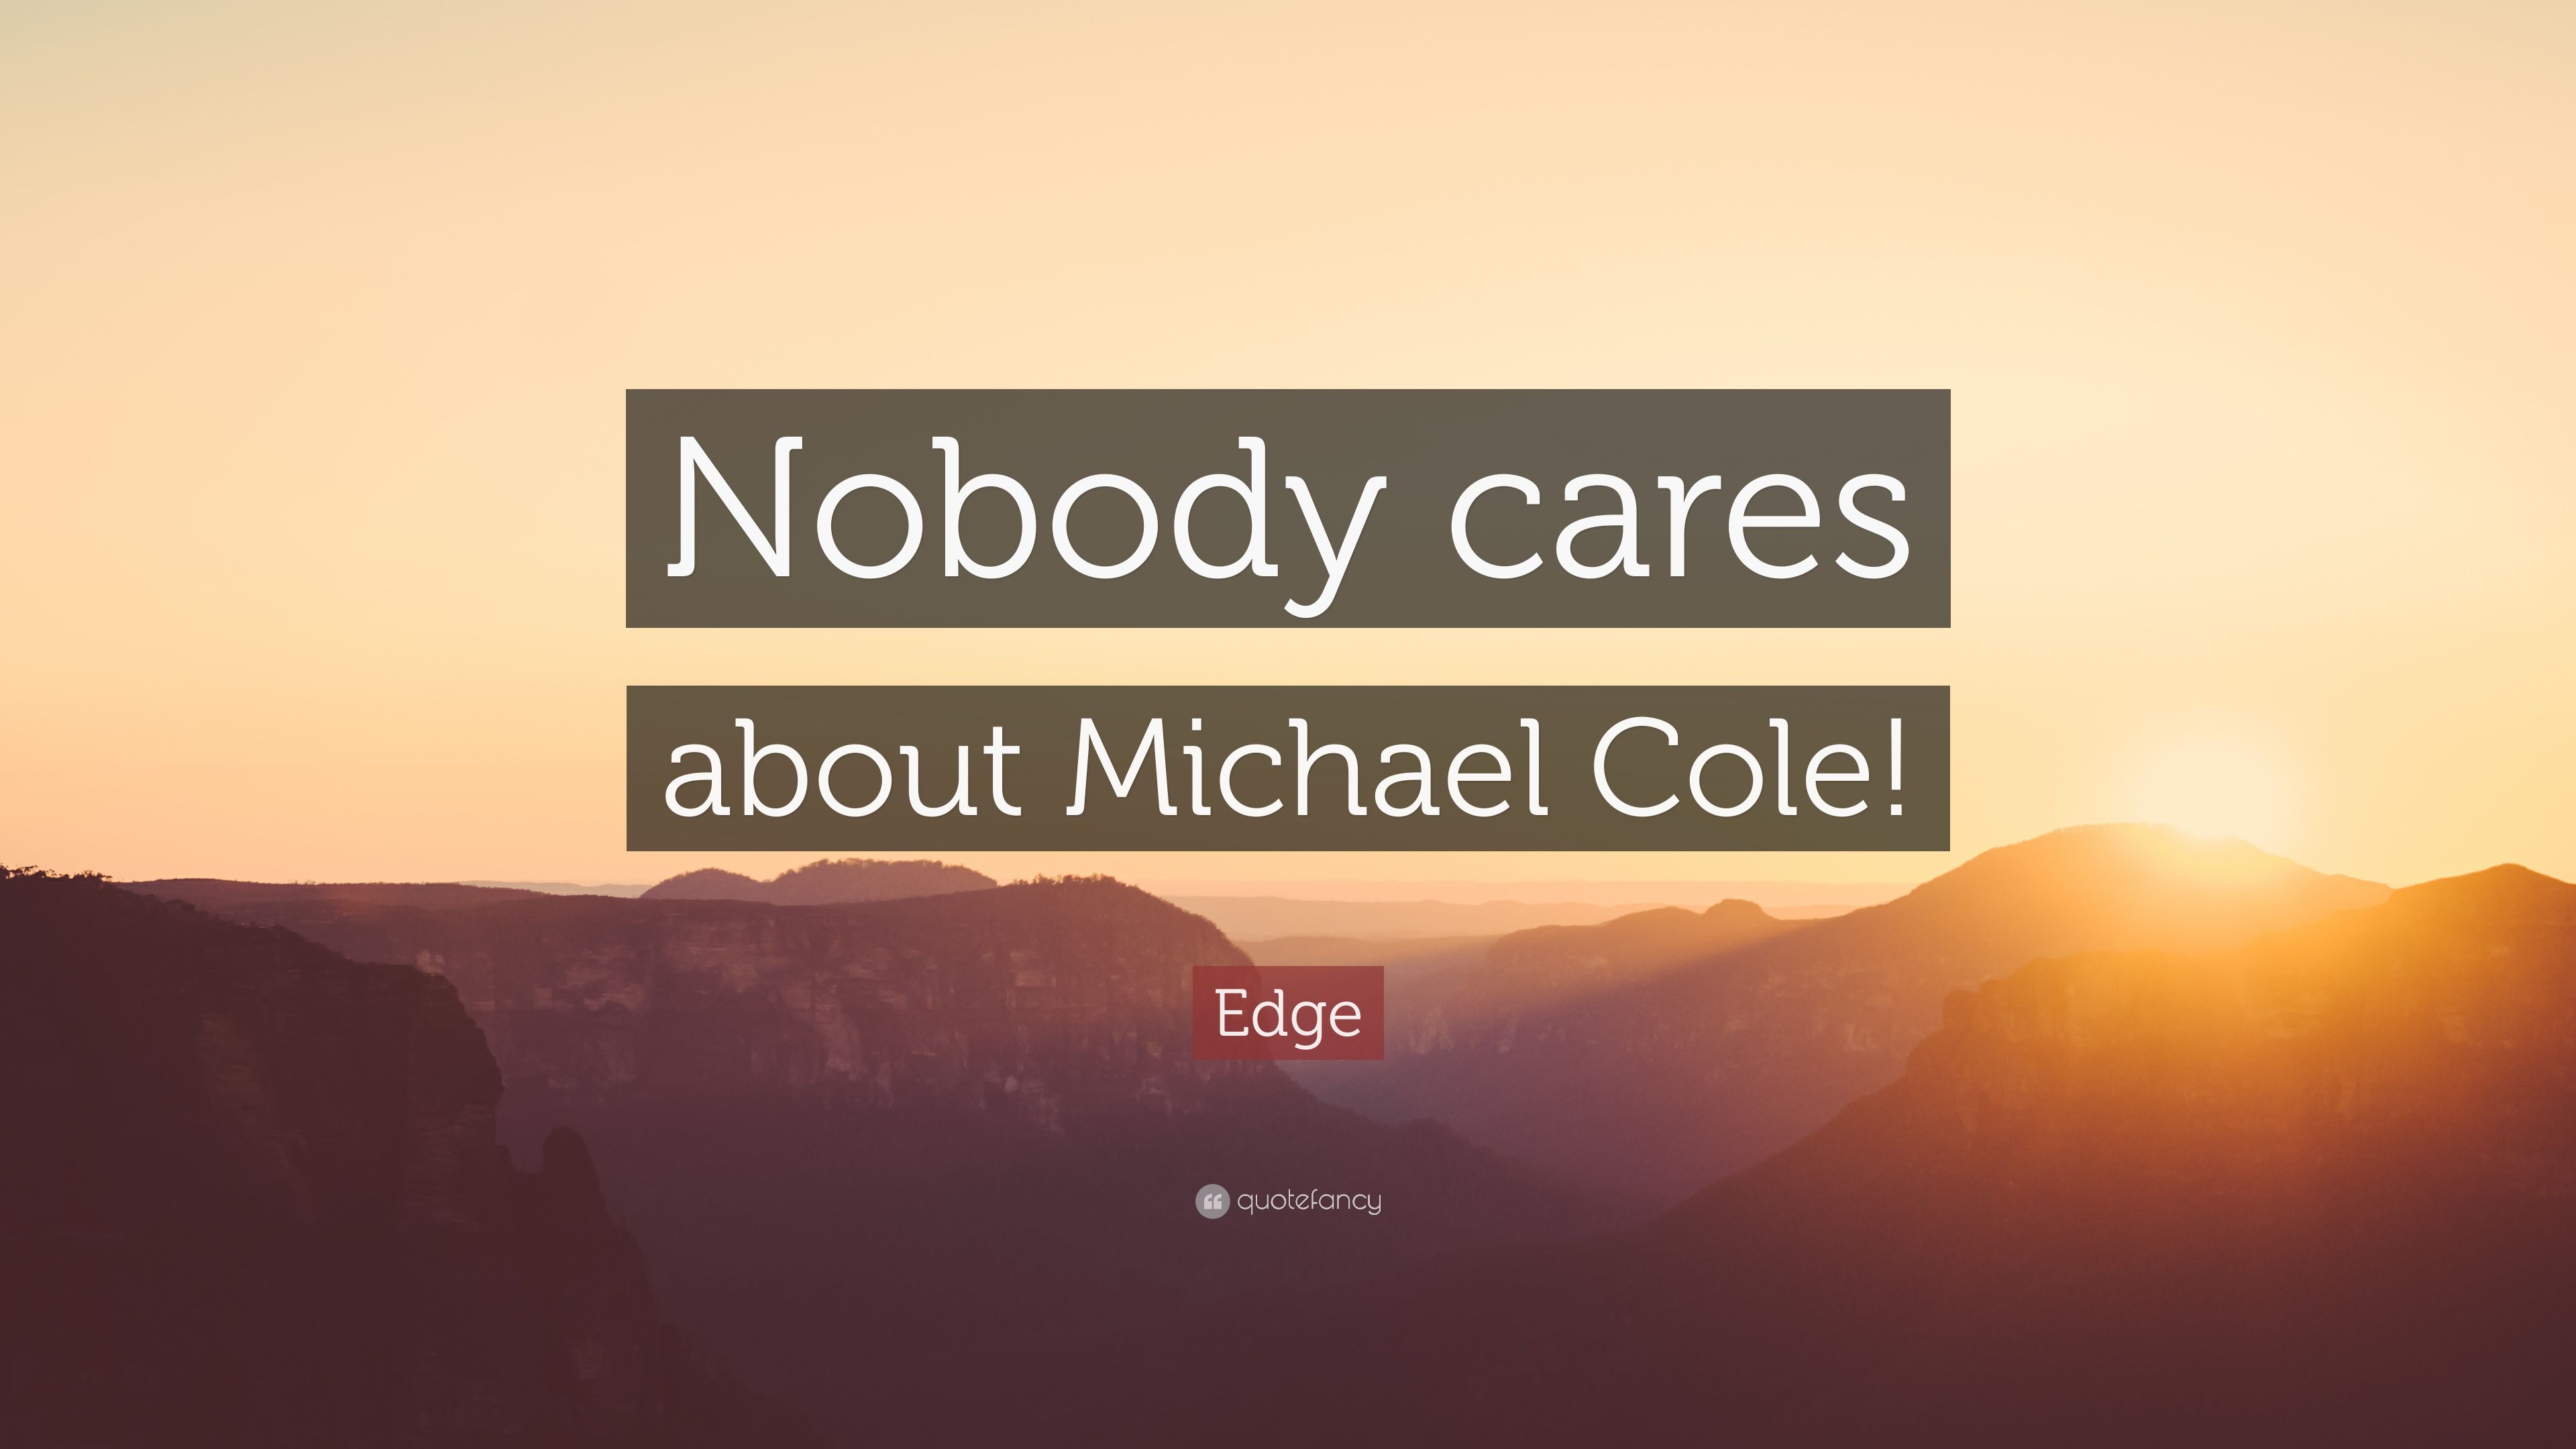 Edge Quote: “Nobody cares about Michael Cole!” 7 wallpaper